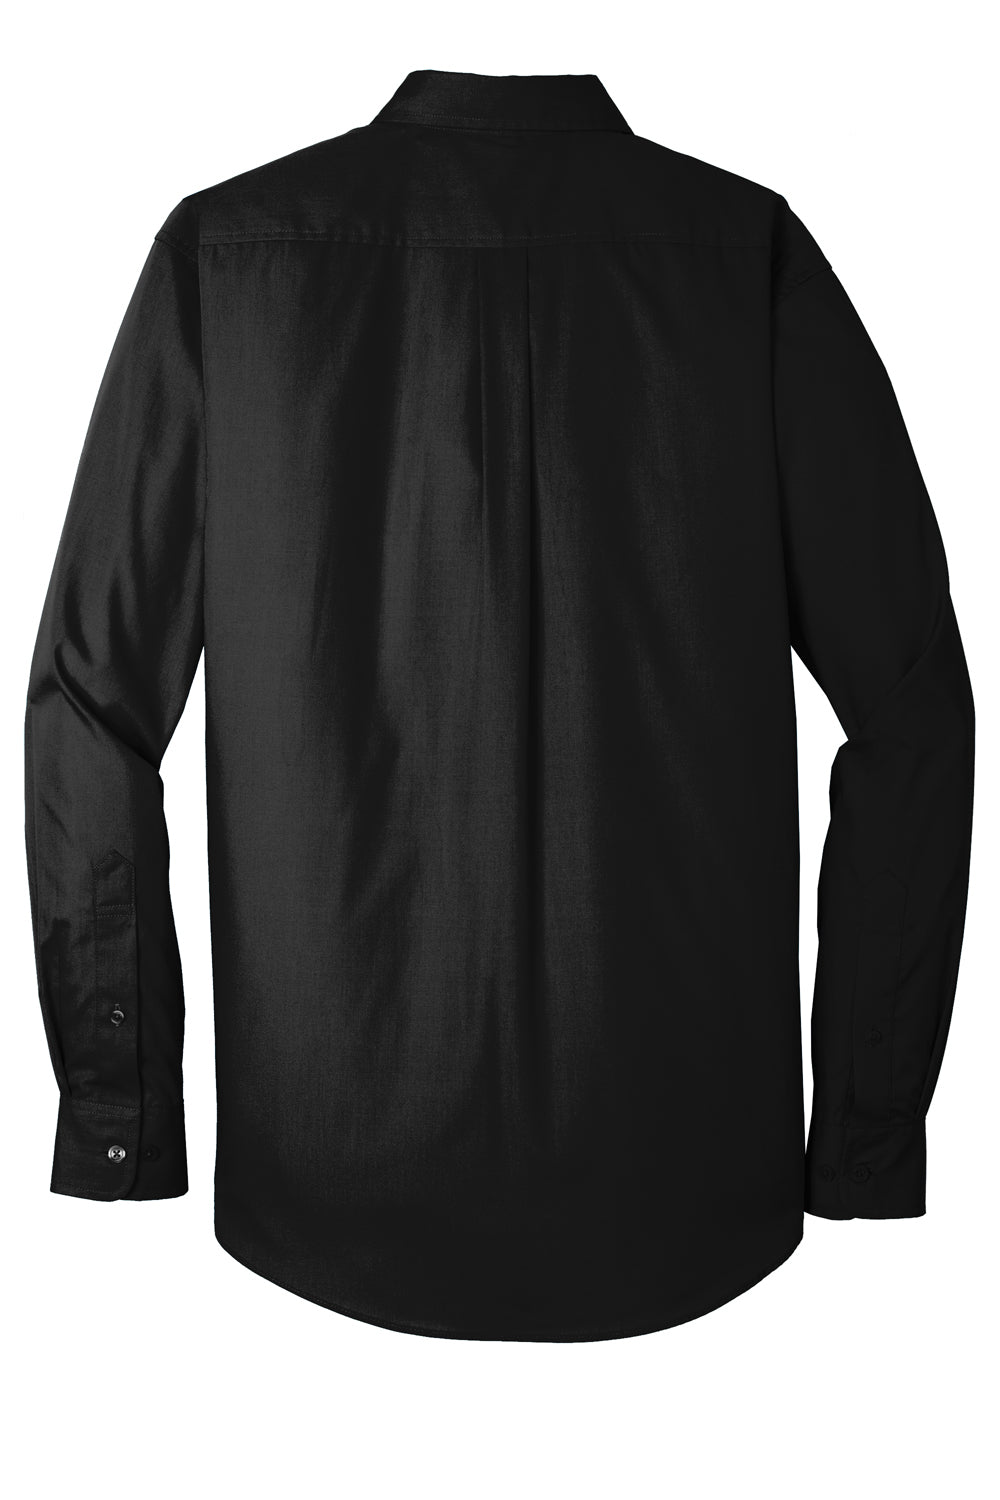 Port Authority W100/TW100 Carefree Stain Resistant Long Sleeve Button Down Shirt w/ Pocket Deep Black Flat Back